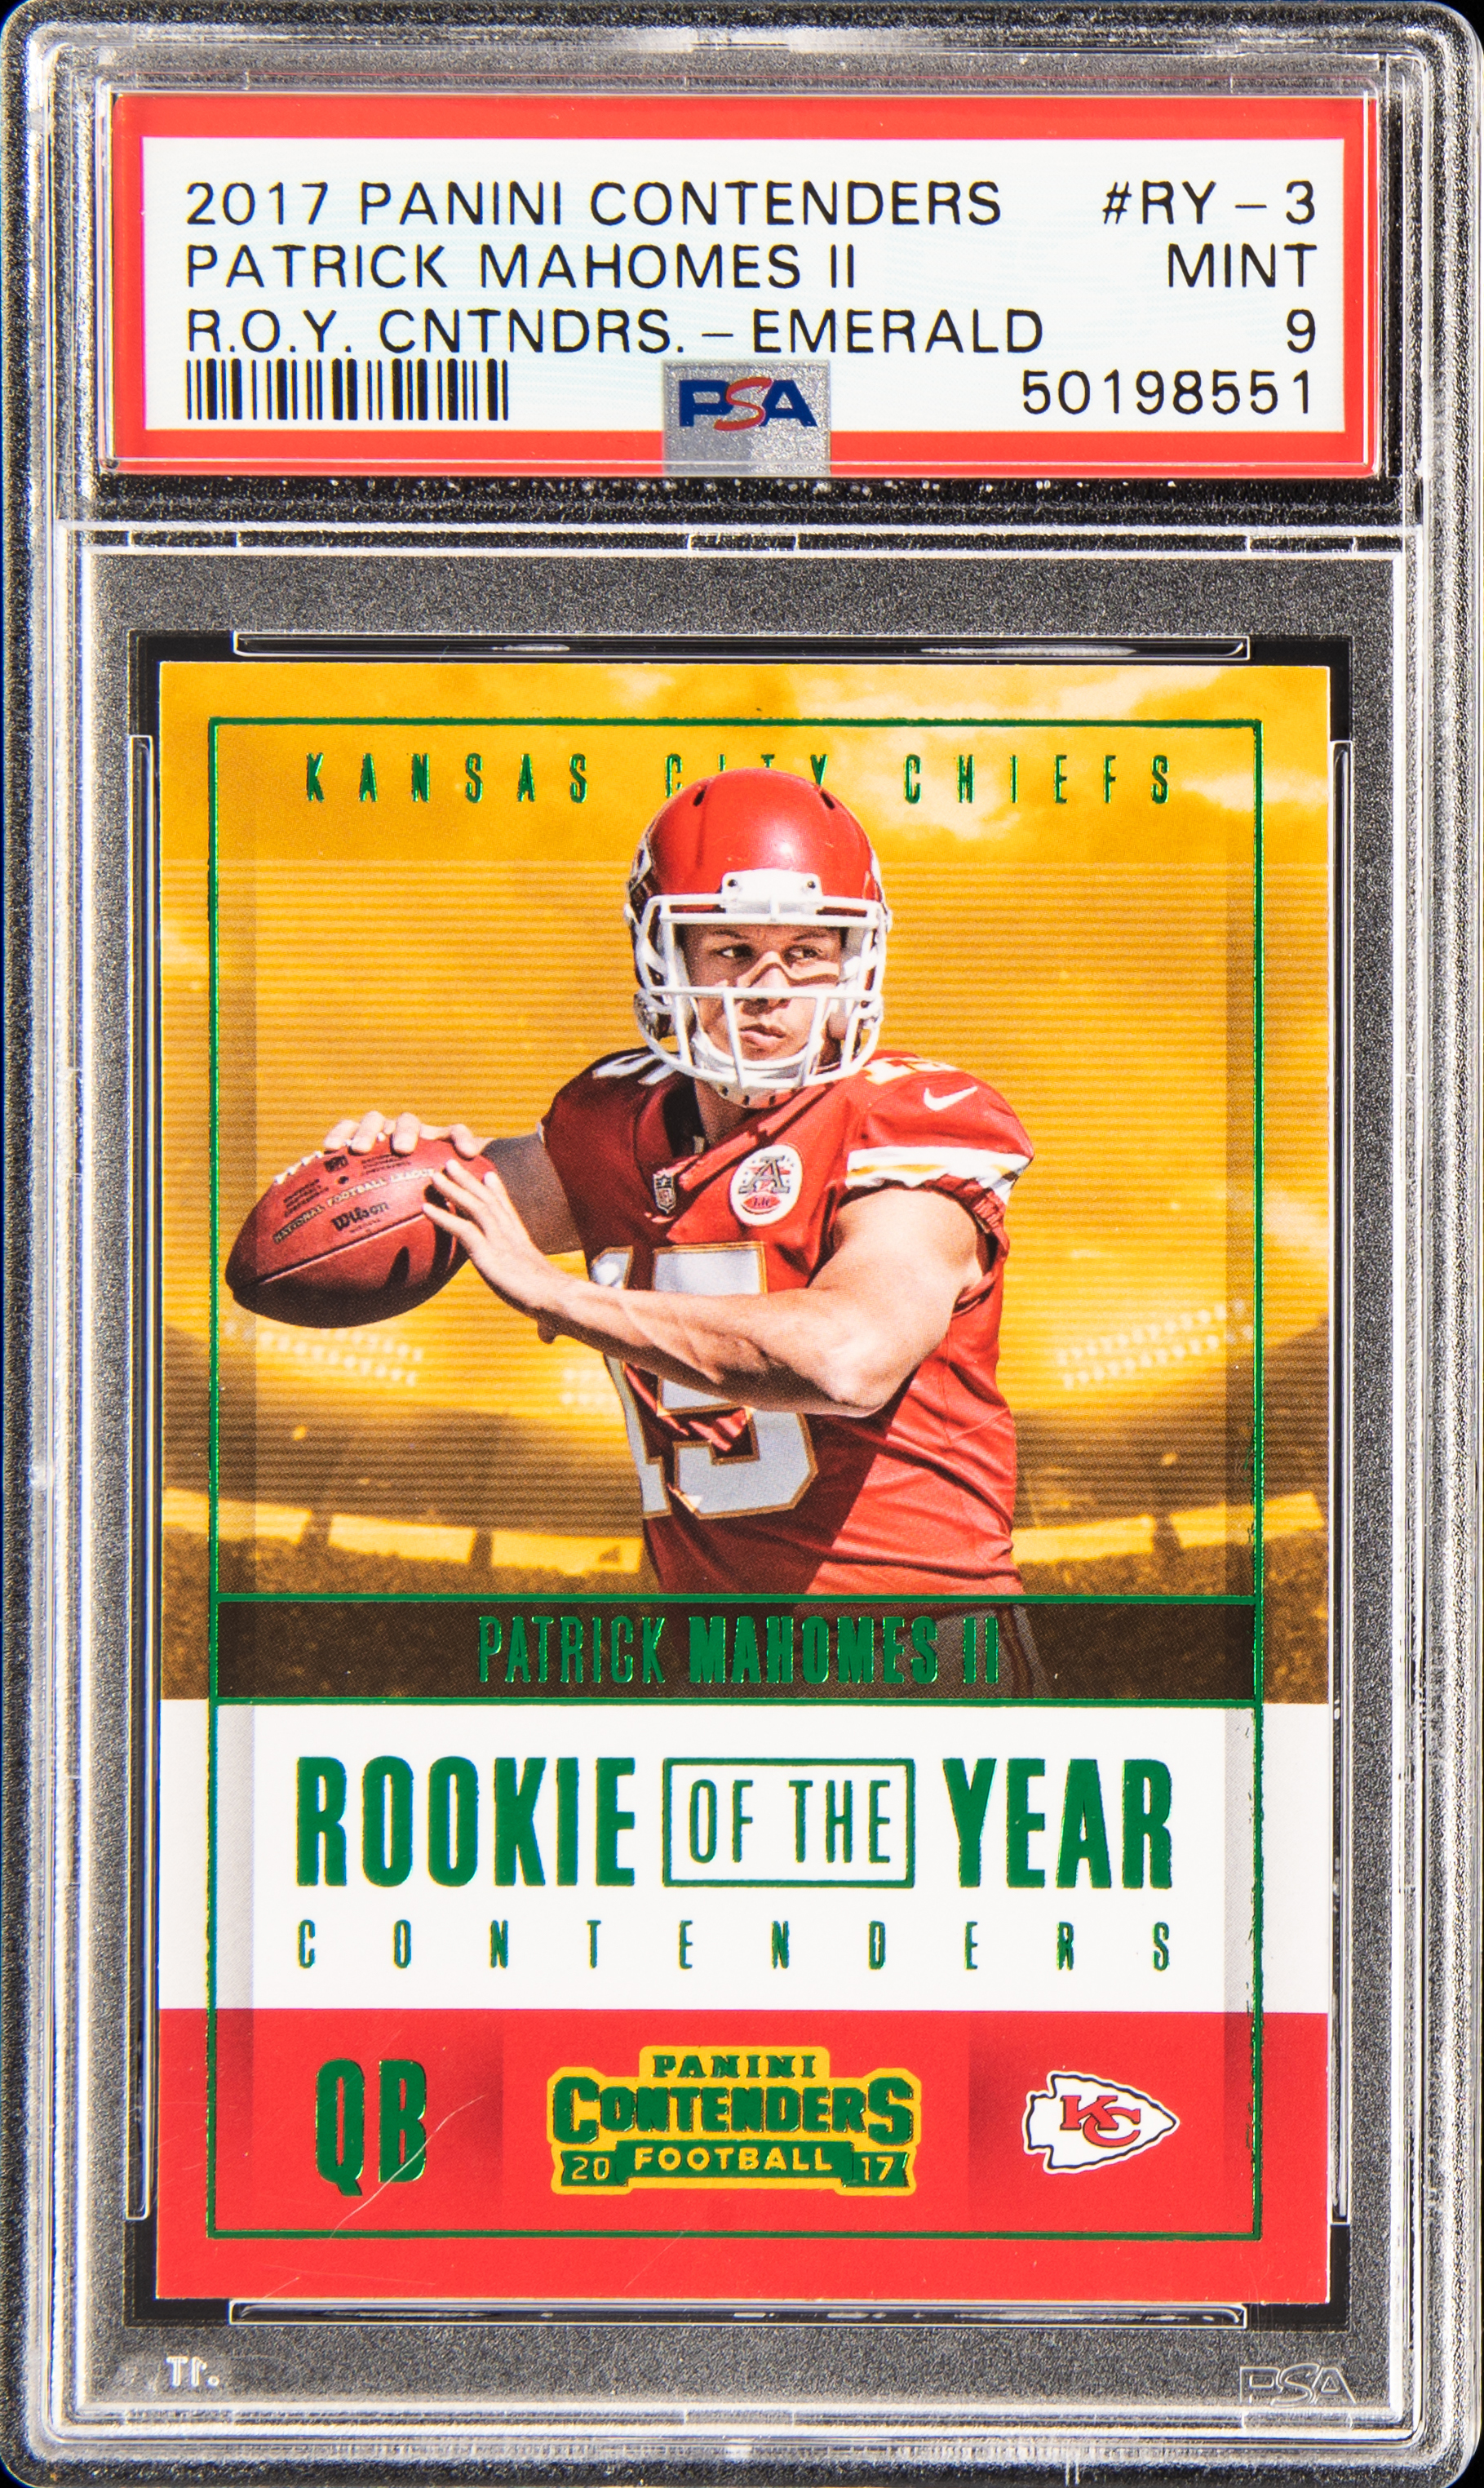 2017 Panini Contenders Rookie Of The Year Contenders Emerald #RY-3 Patrick Mahomes II Rookie Card – PSA MINT 9